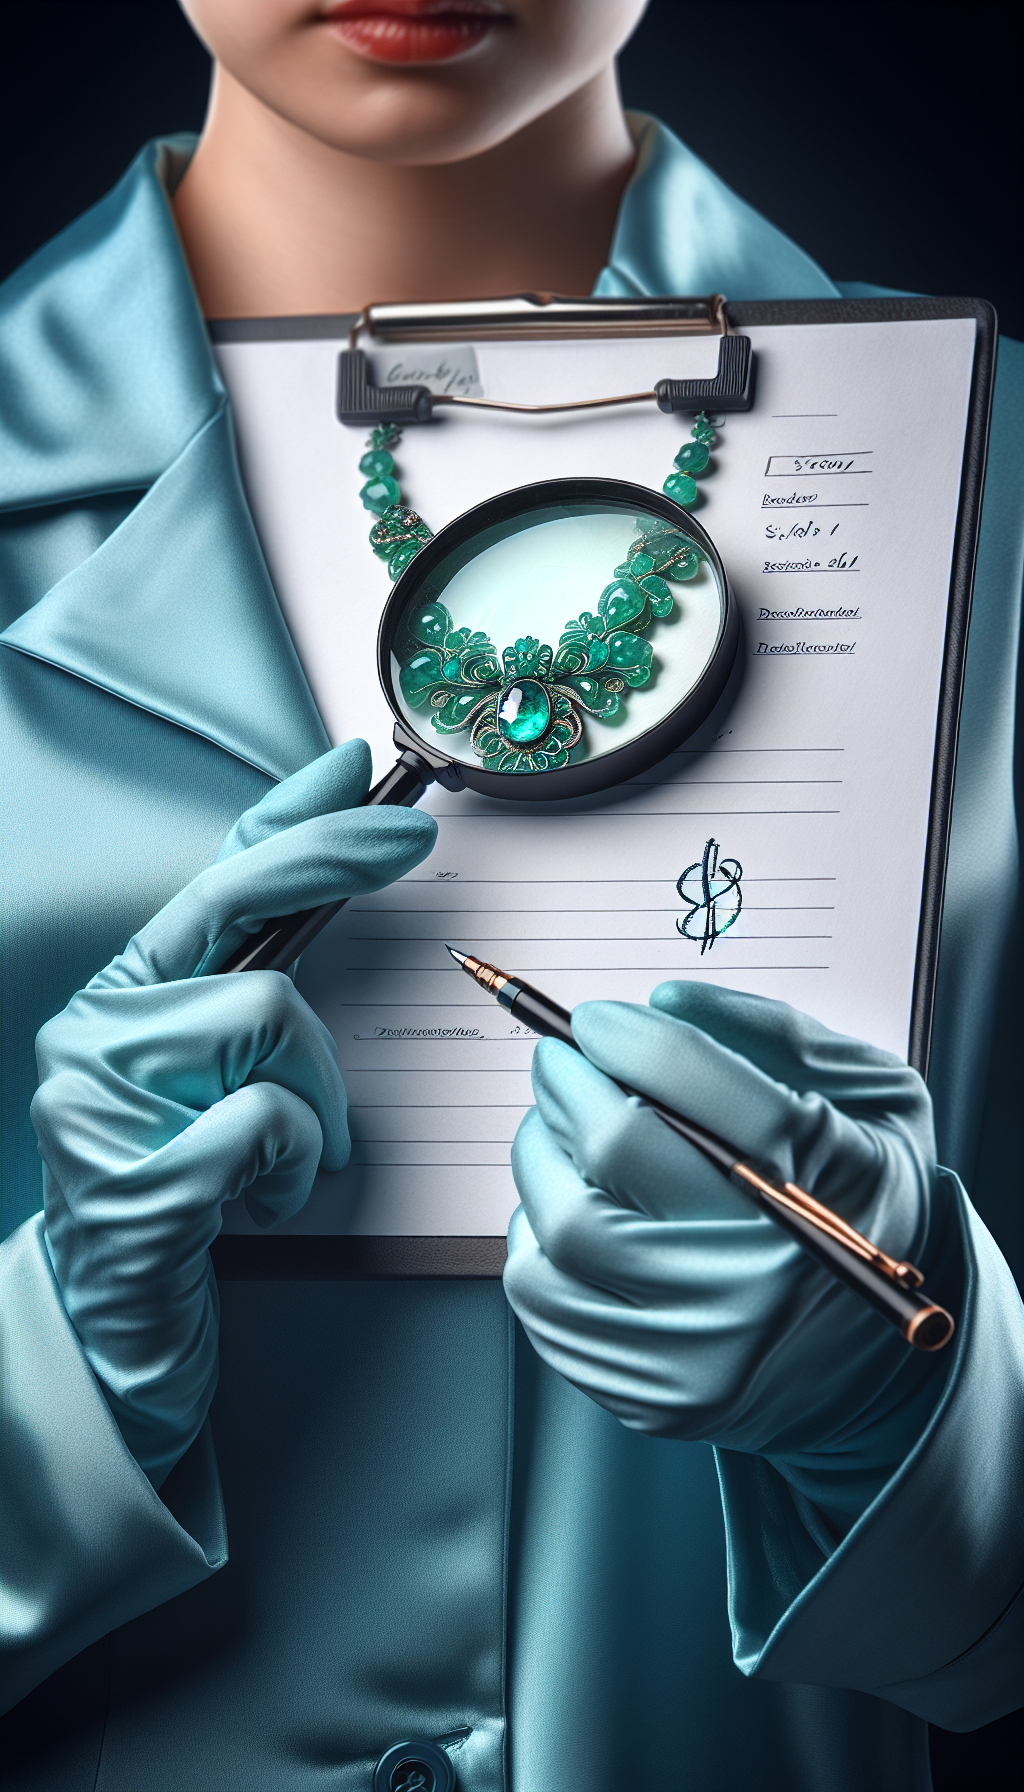 A magnifying glass held by an elegant gloved hand (to denote professionalism) zooms in on a radiant, ornate jade necklace, with the magnification revealing intricate details and shimmering aspects of the piece. Through the lens, expert notes and dollar signs, subtly sketched in a classic script, float beside the jade, symbolizing the appraiser’s specialized valuation insight.